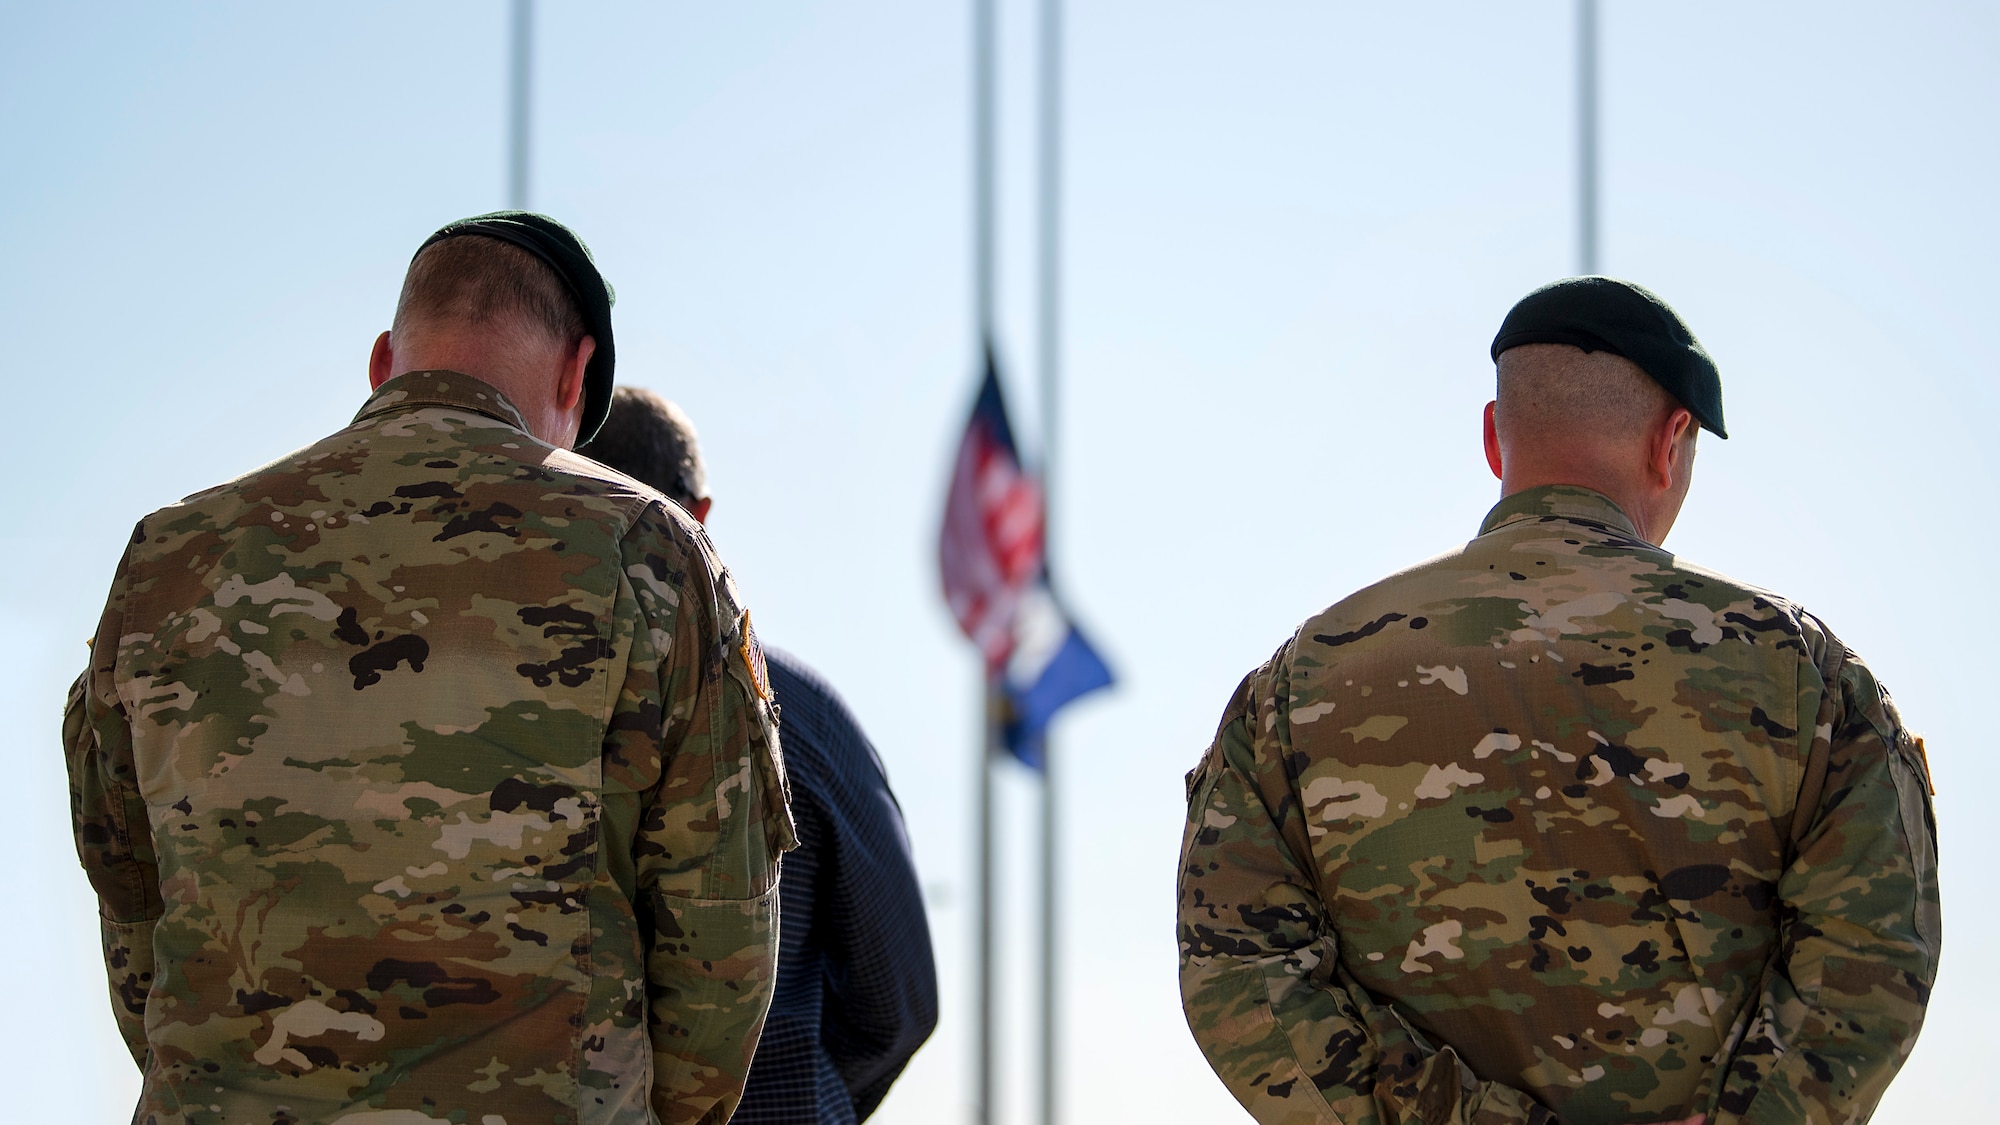 MacDill service members bow their head in remembrance during a Veterans Day event held at MacDill Air Force Base, Fla., Nov. 8, 2018. Veterans Day honors the men and women of the armed forces who have served, past and present.